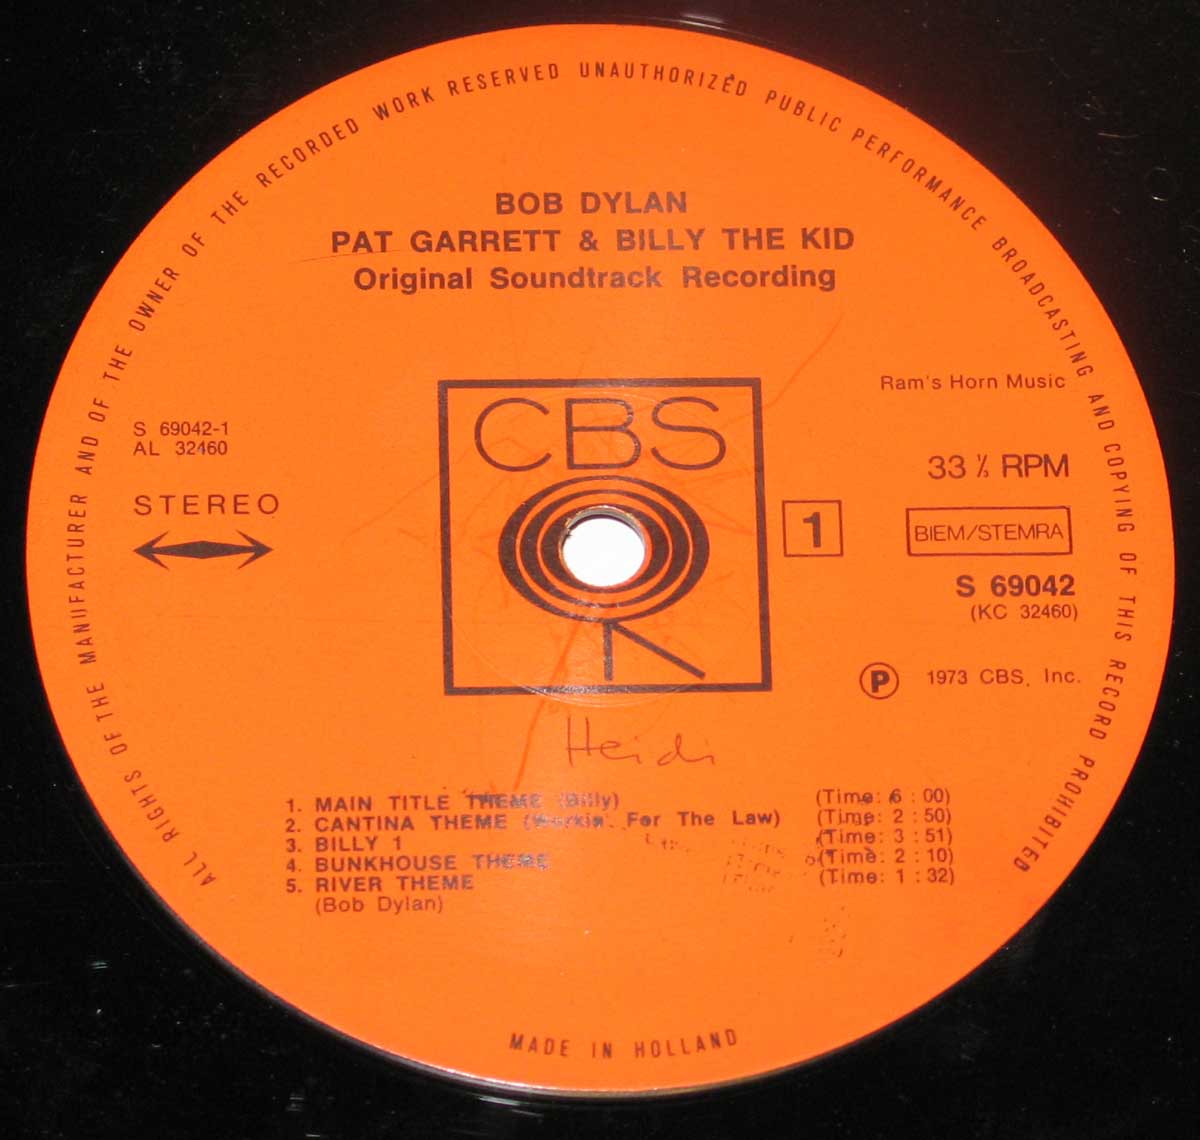 Close-Up Photo of the CBS ( with the walking eye ) Record Label of BOB DYLAN Pat Garrett & Billy The Kid 